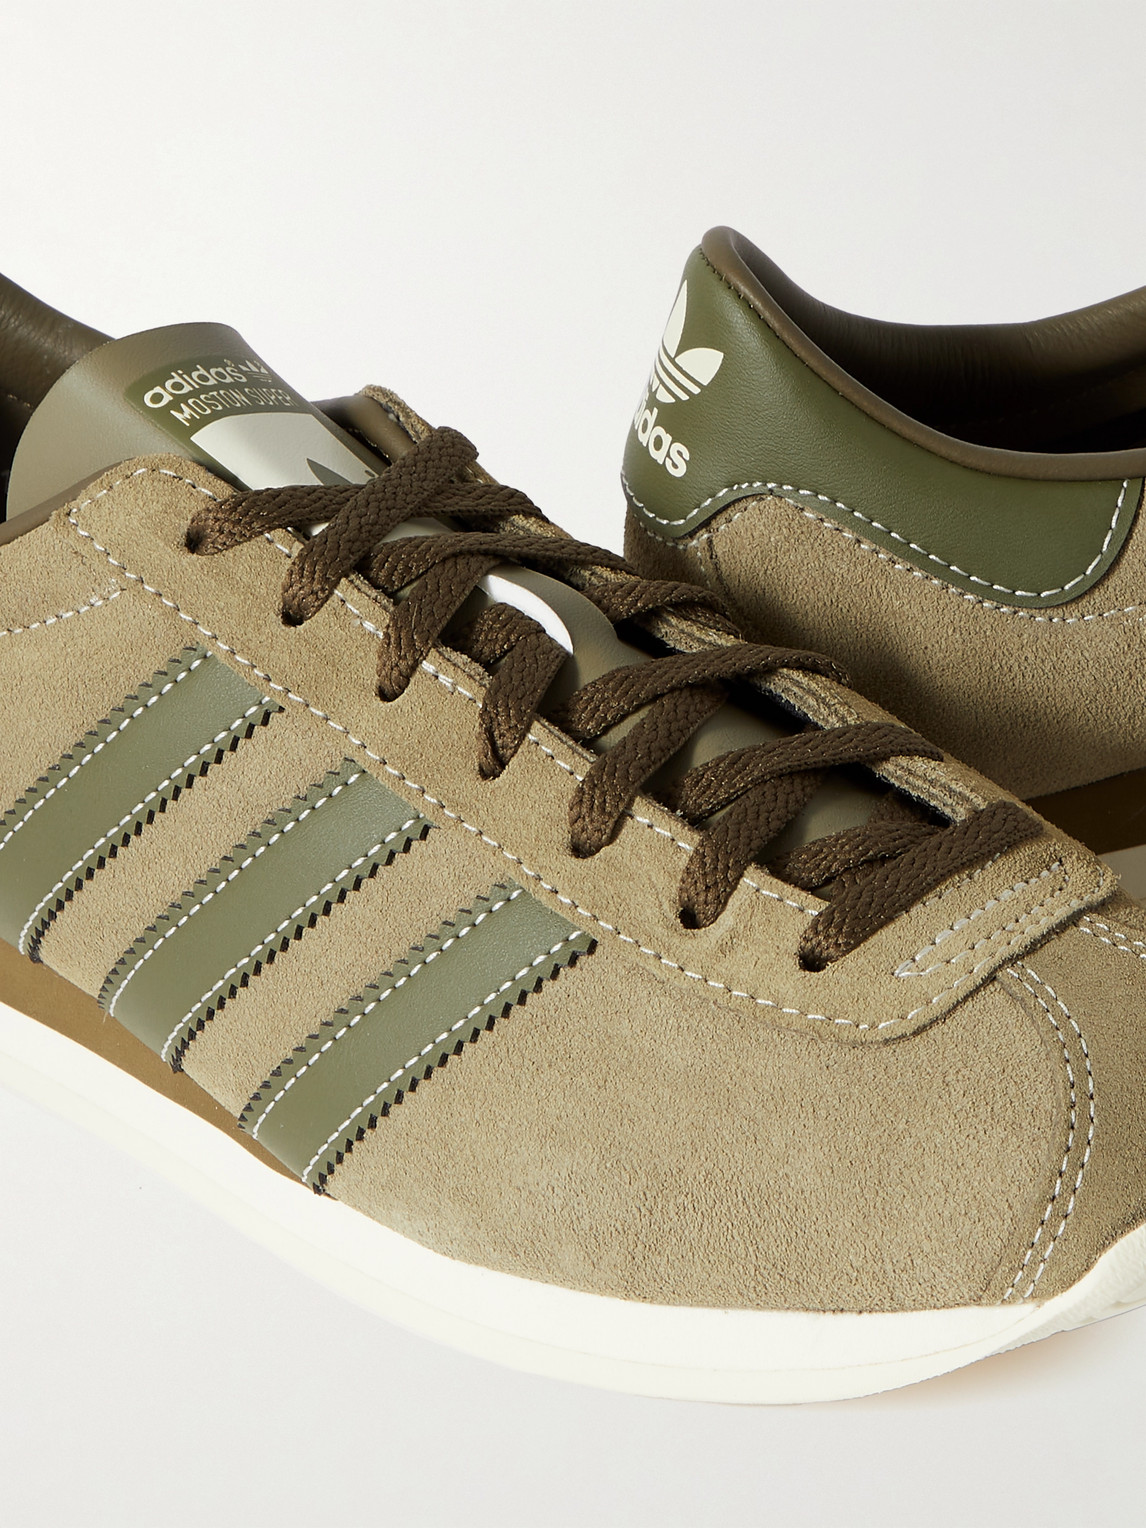 Shop Adidas Originals Moston Super Spzl Leather-trimmed Suede Sneakers In Green